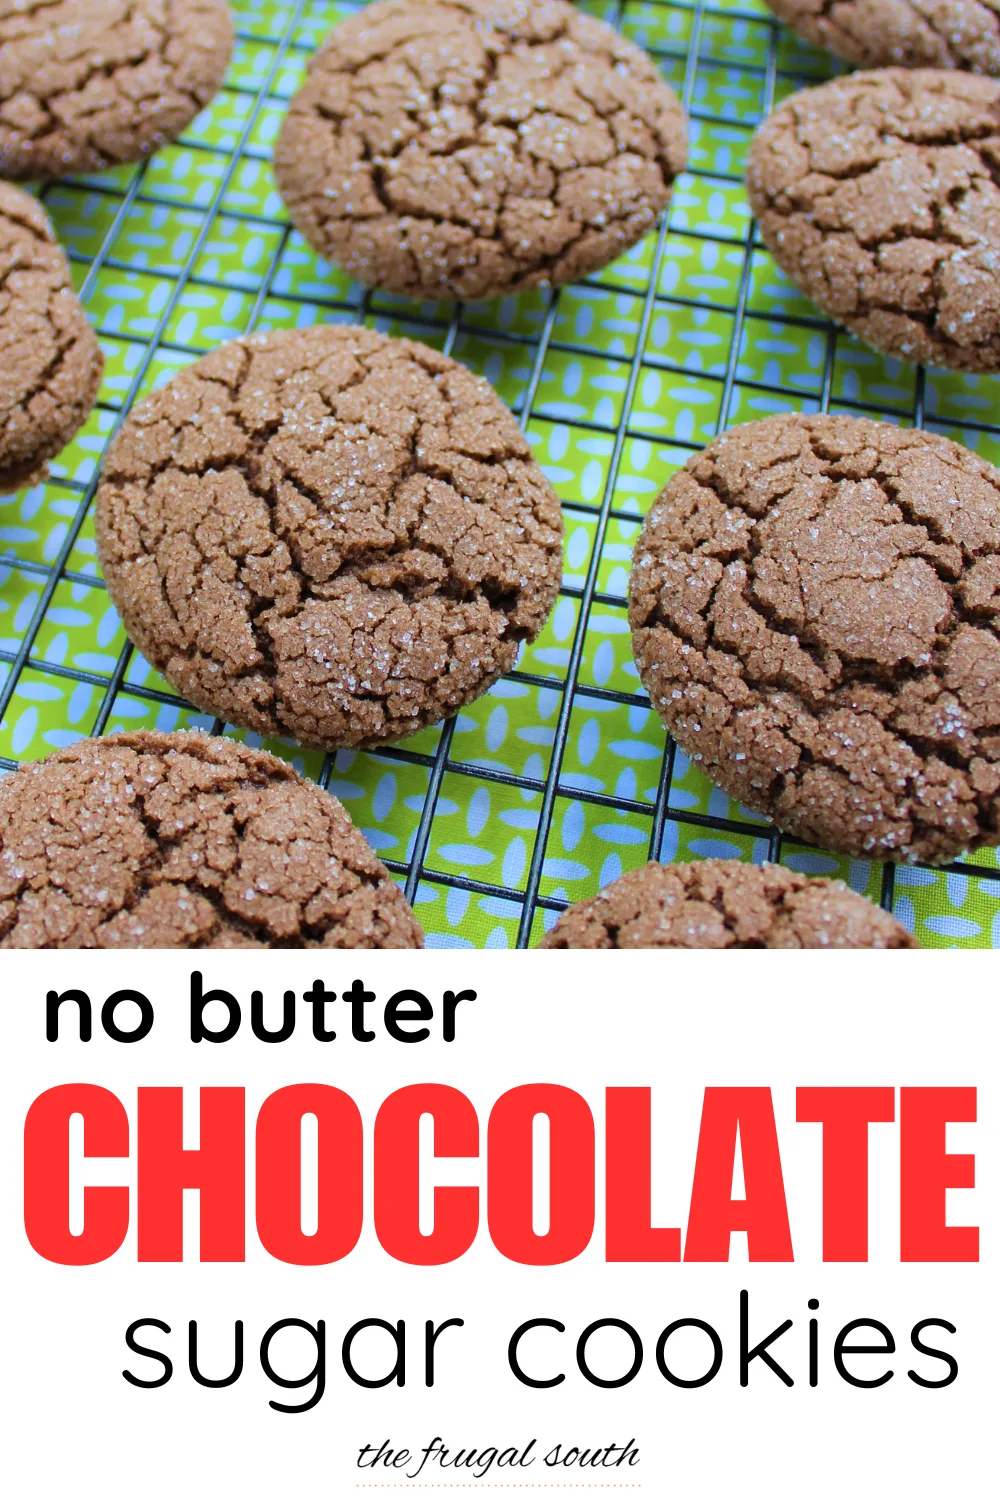 no butter chocolate cookies pinterest pin image